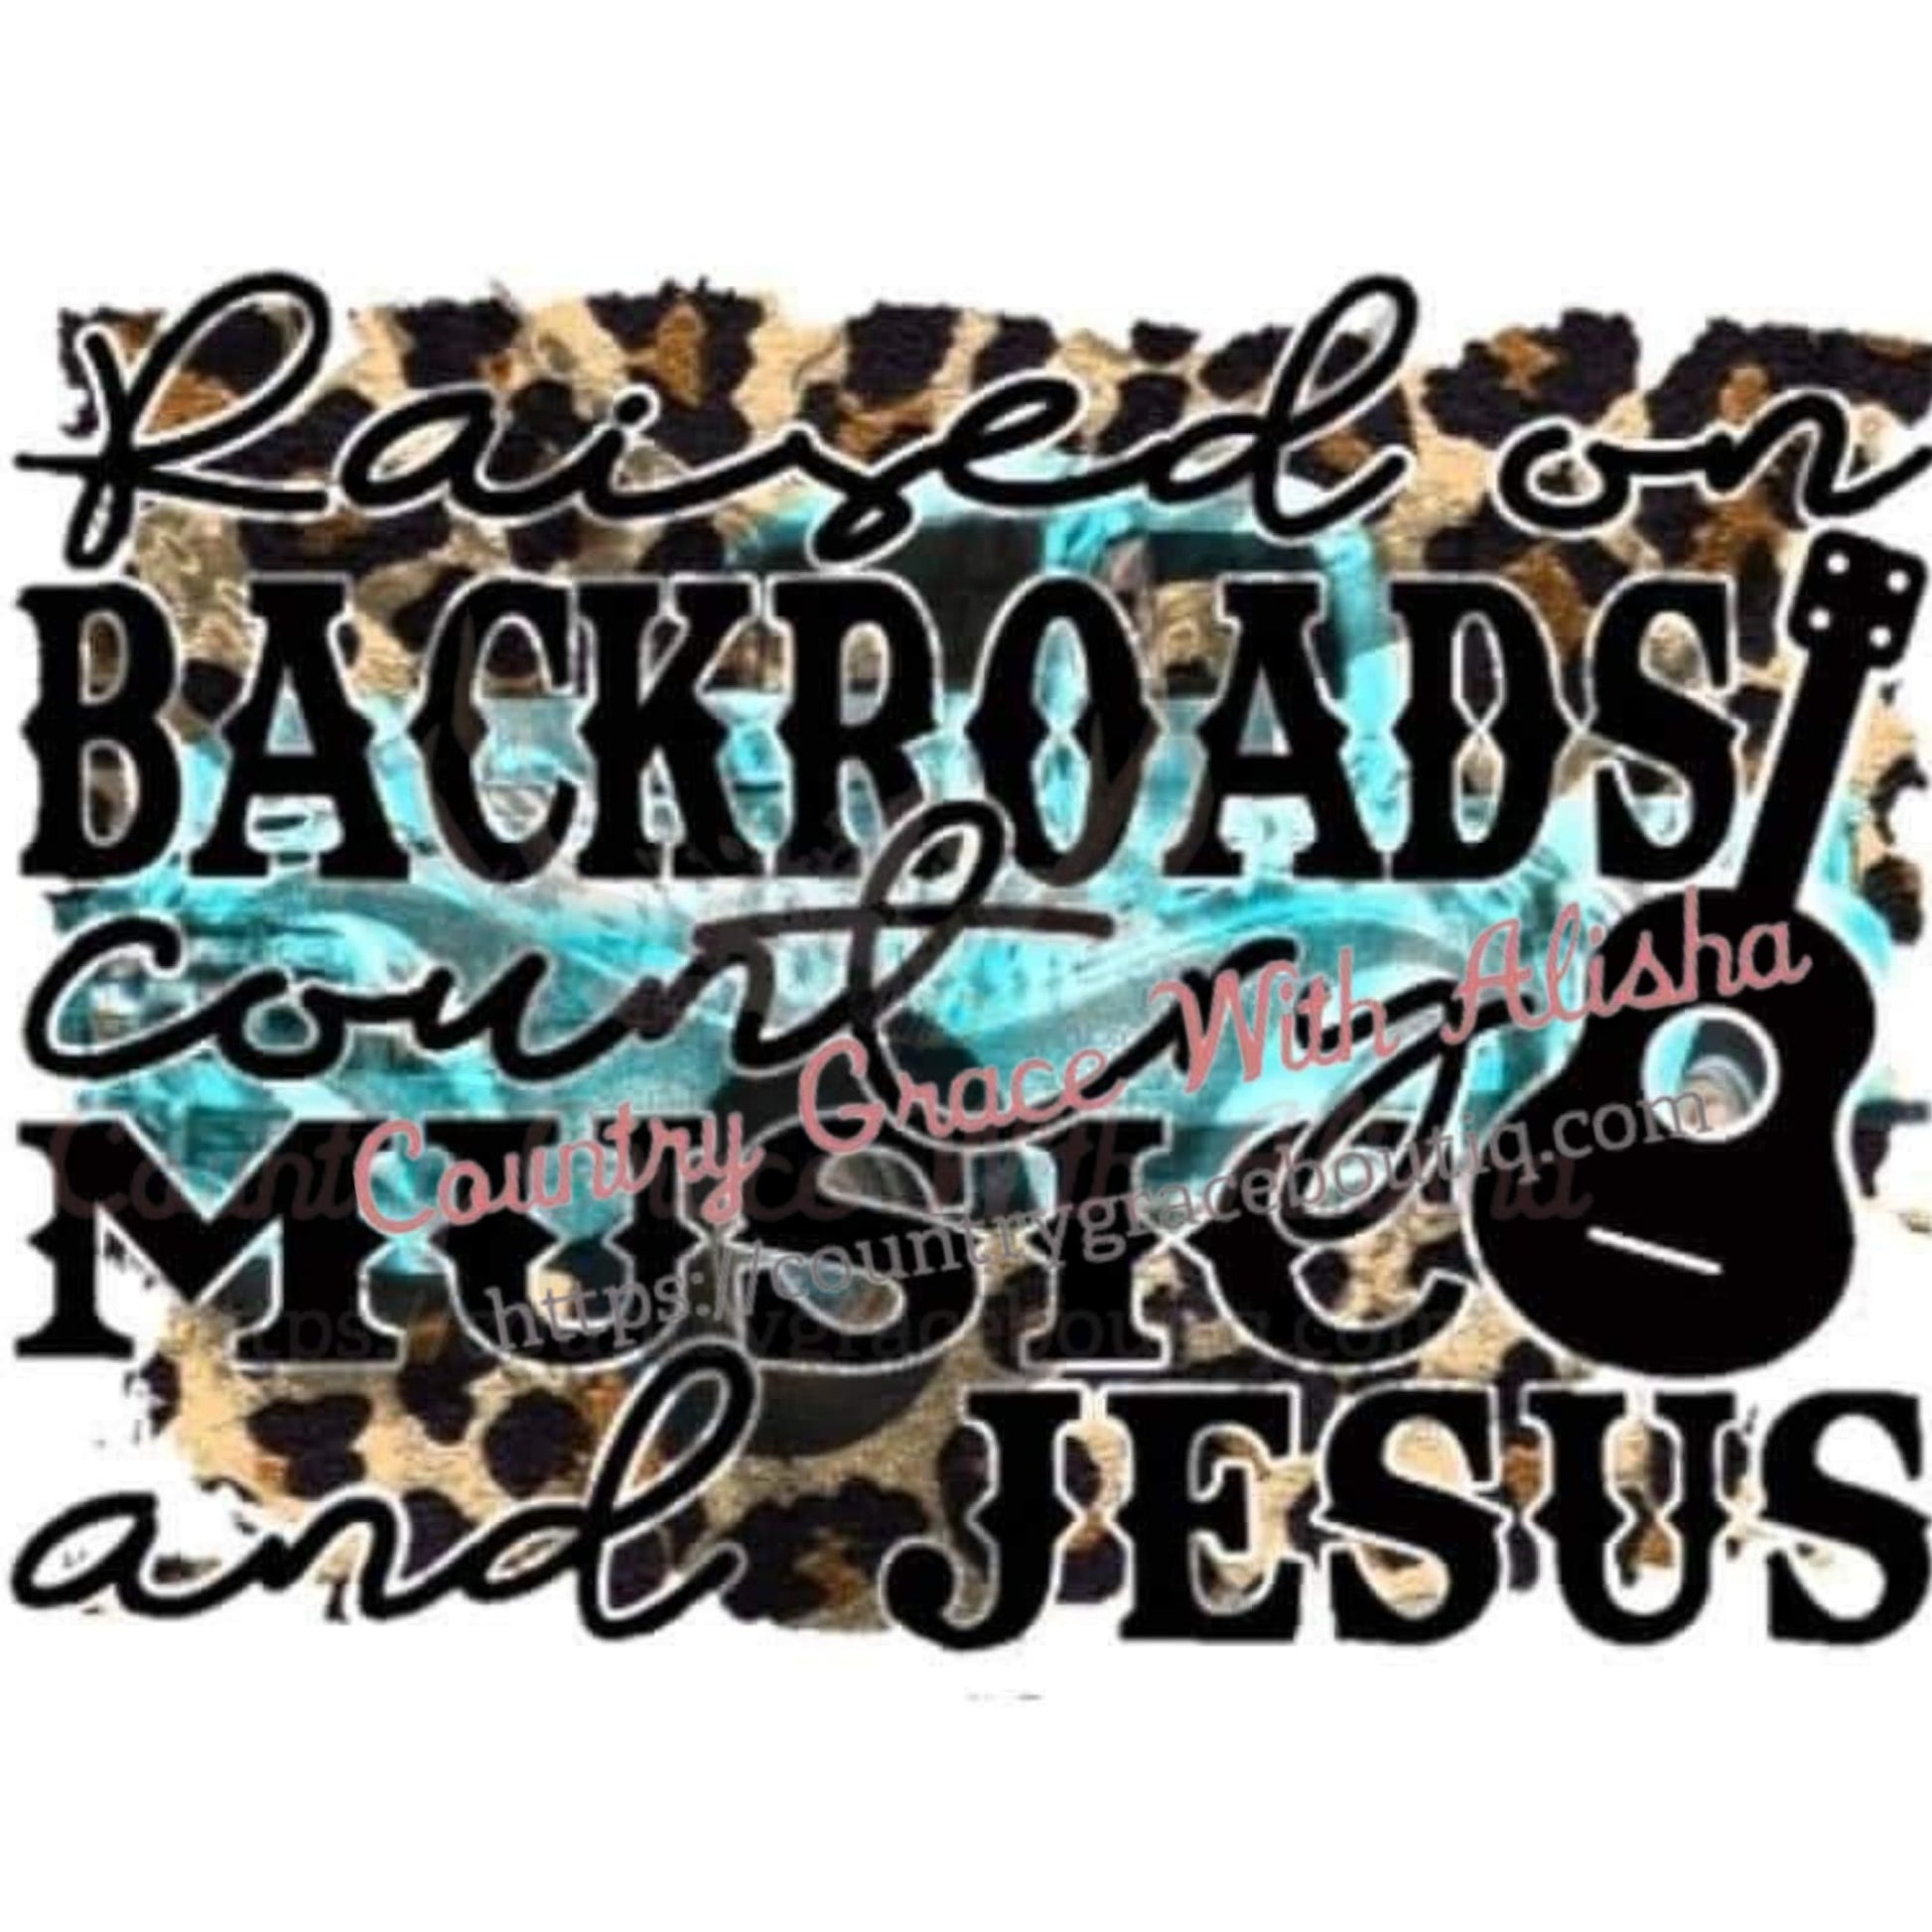 Raised On Backroads Sublimation Transfer - Sub $1.50 Country